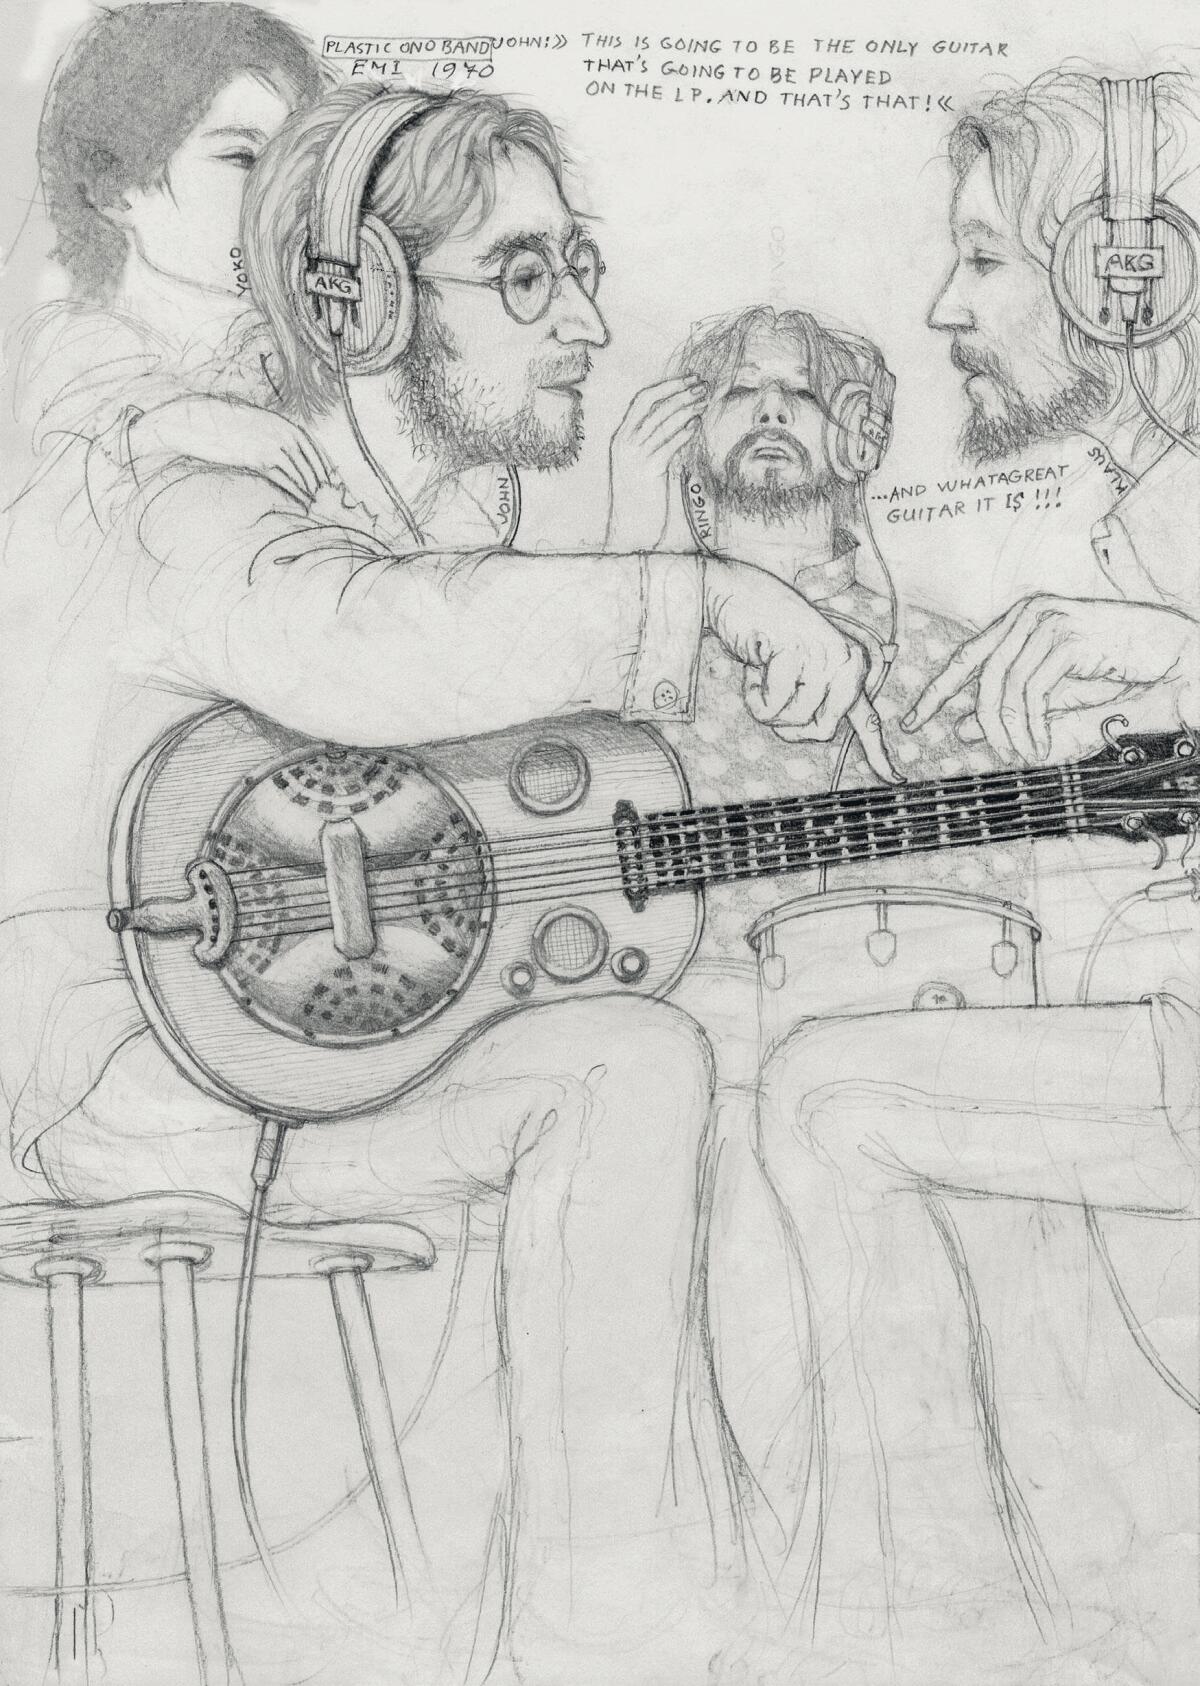  A Klaus Voormann illustration of musicians in the 'John Lennon / Plastic Ono Band' sessions.